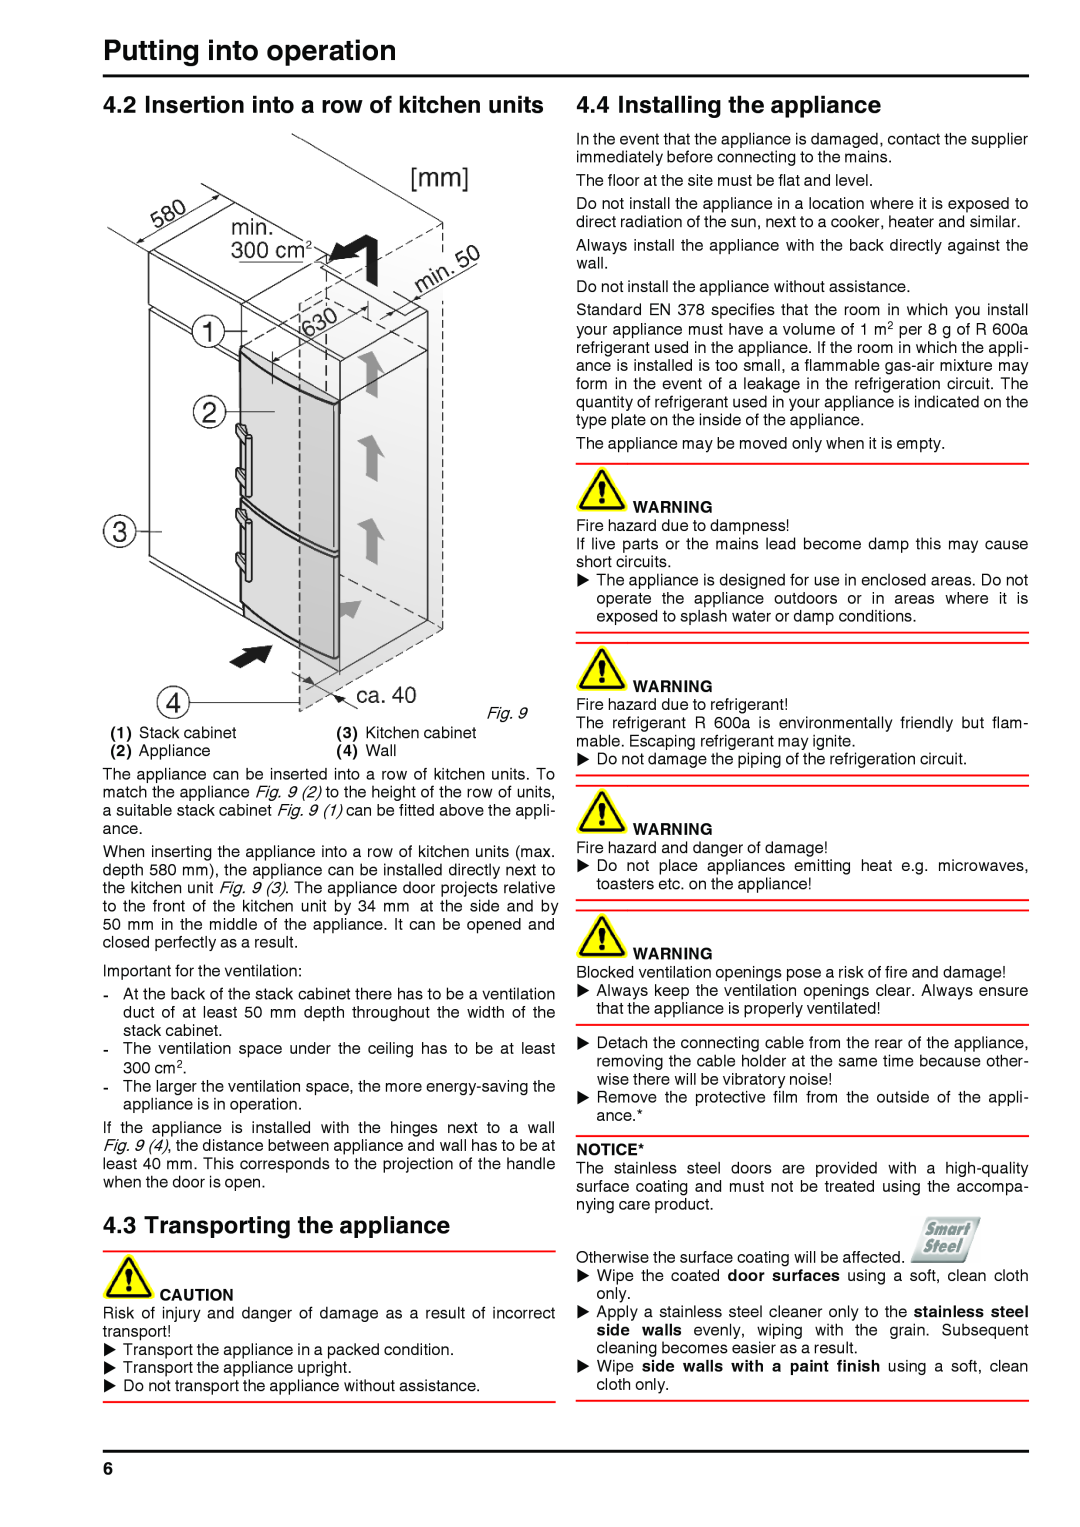 Liebherr 290910 7084364 - 03 operating instructions Transporting the appliance, Putting into operation 